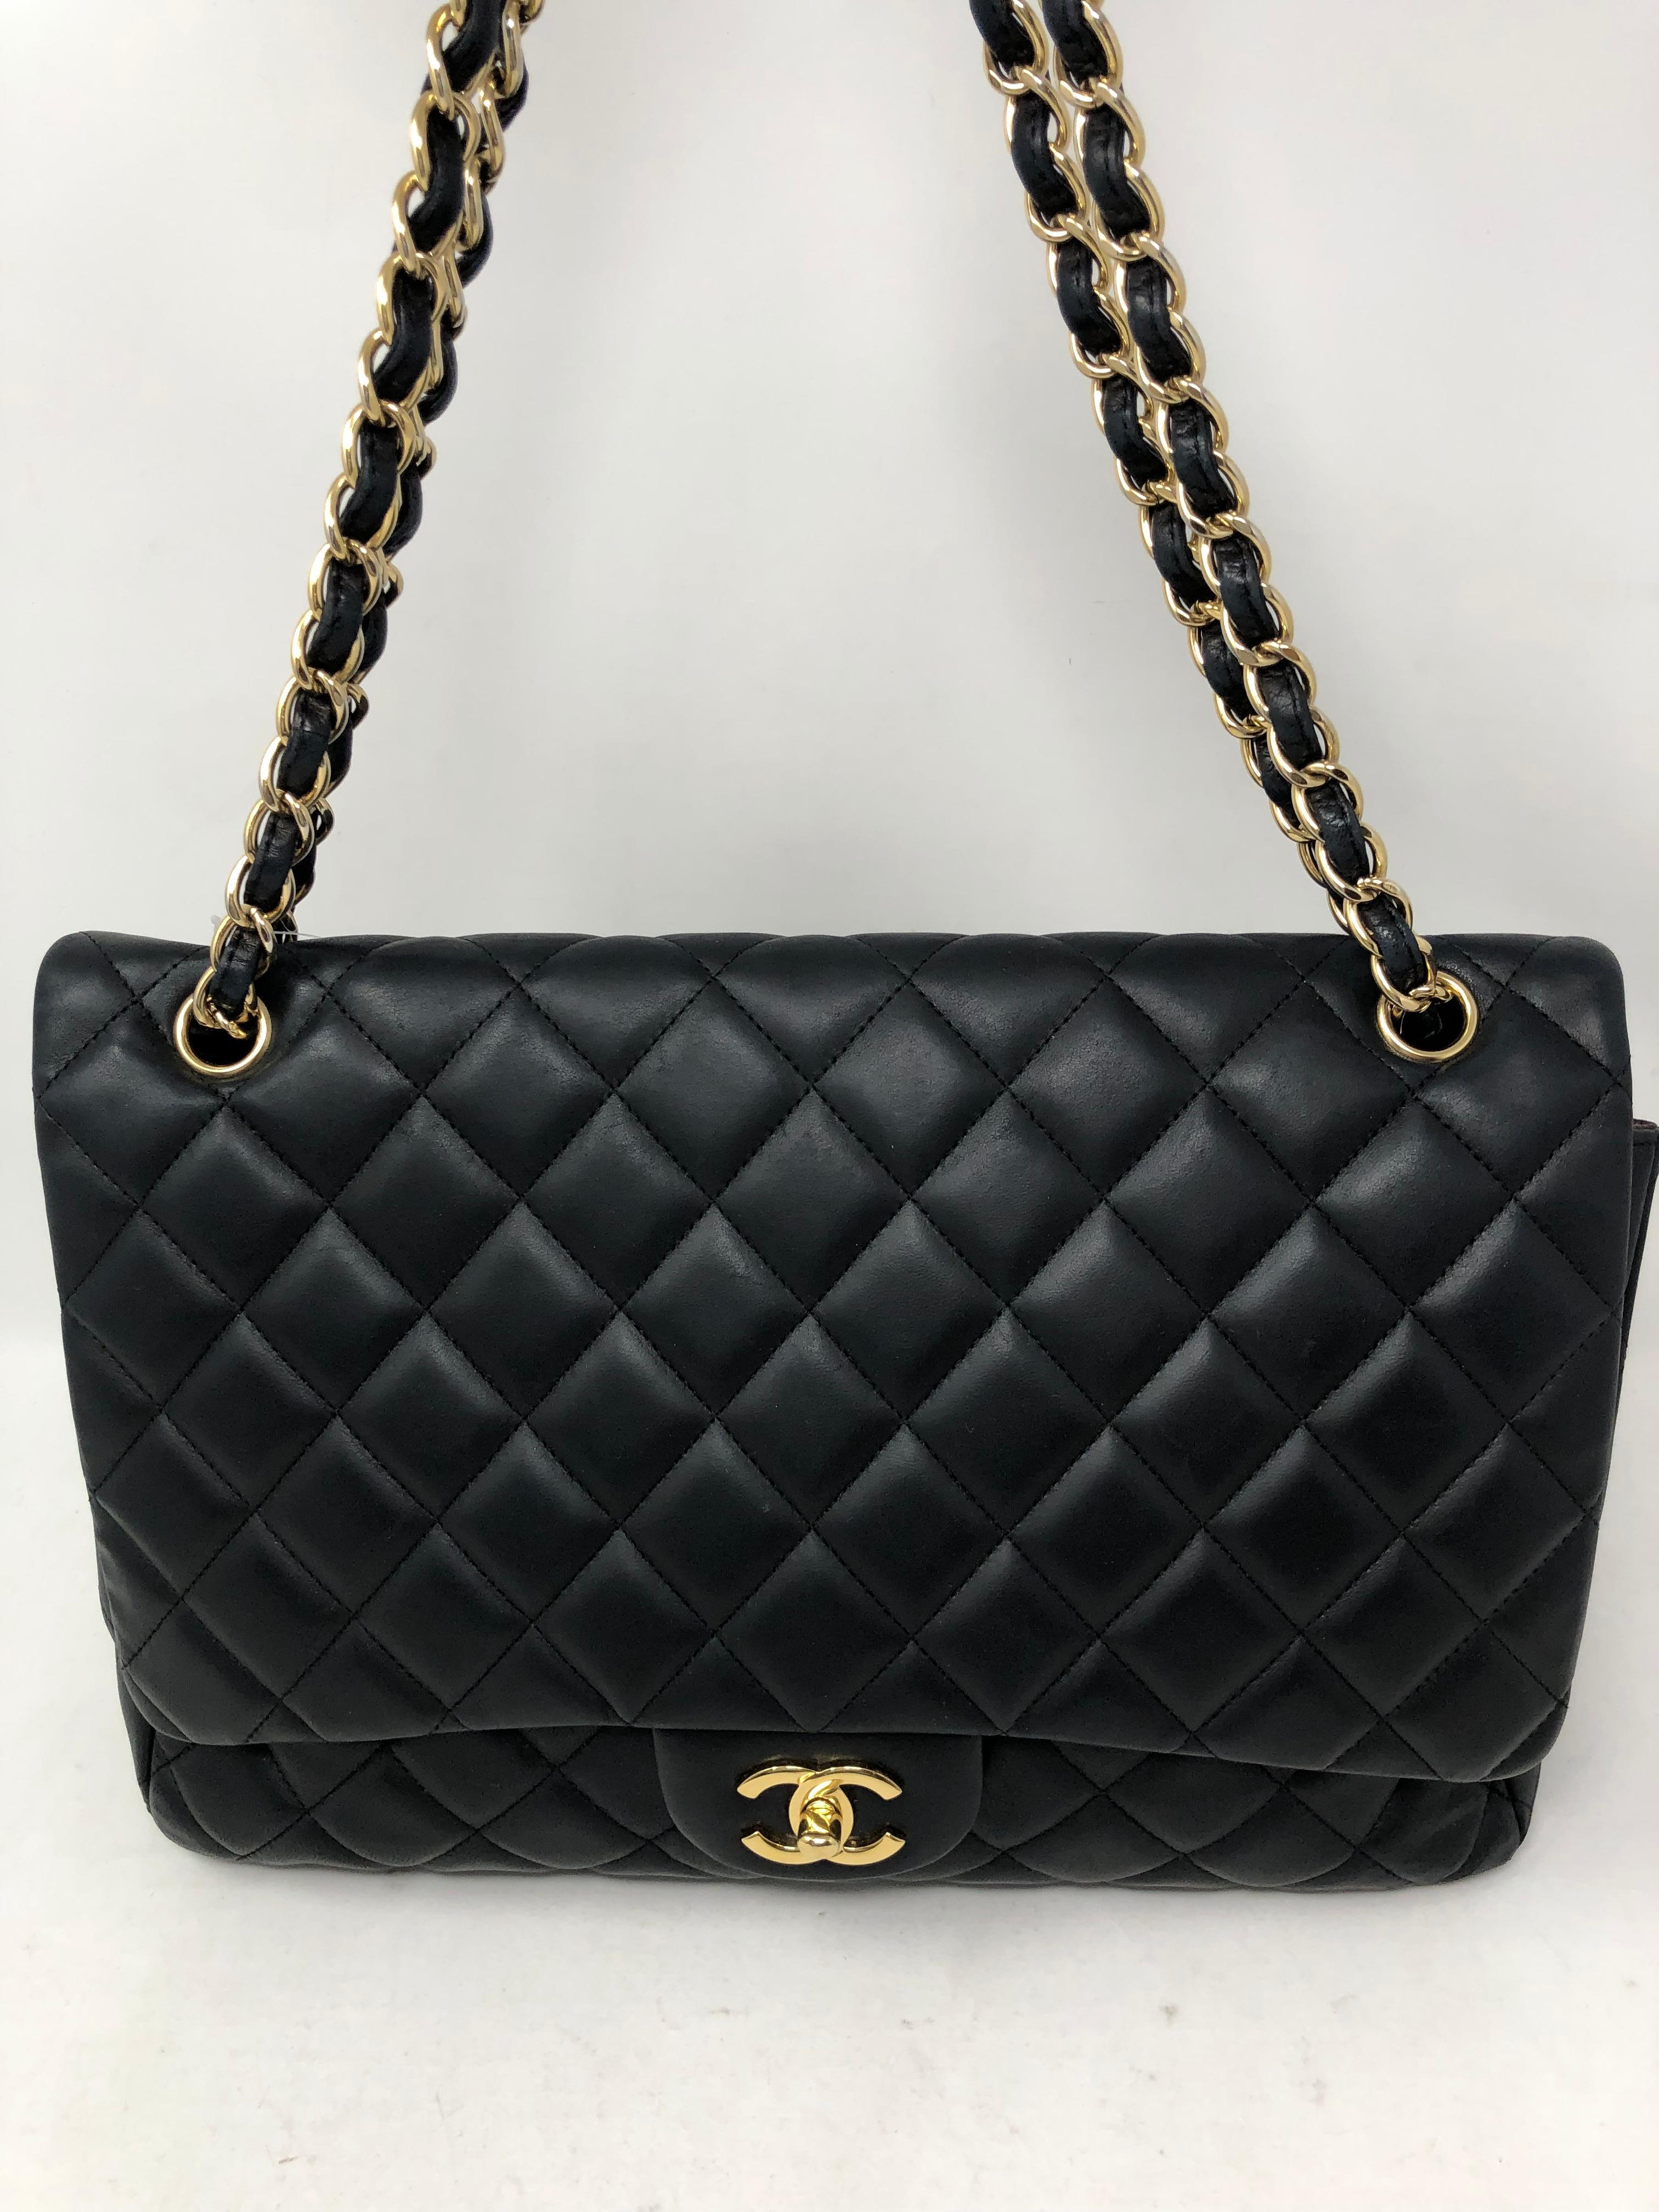 Chanel Black Lambskin Maxi Single Flap Bag. Excellent condition. Gold hardware. Maxi 13